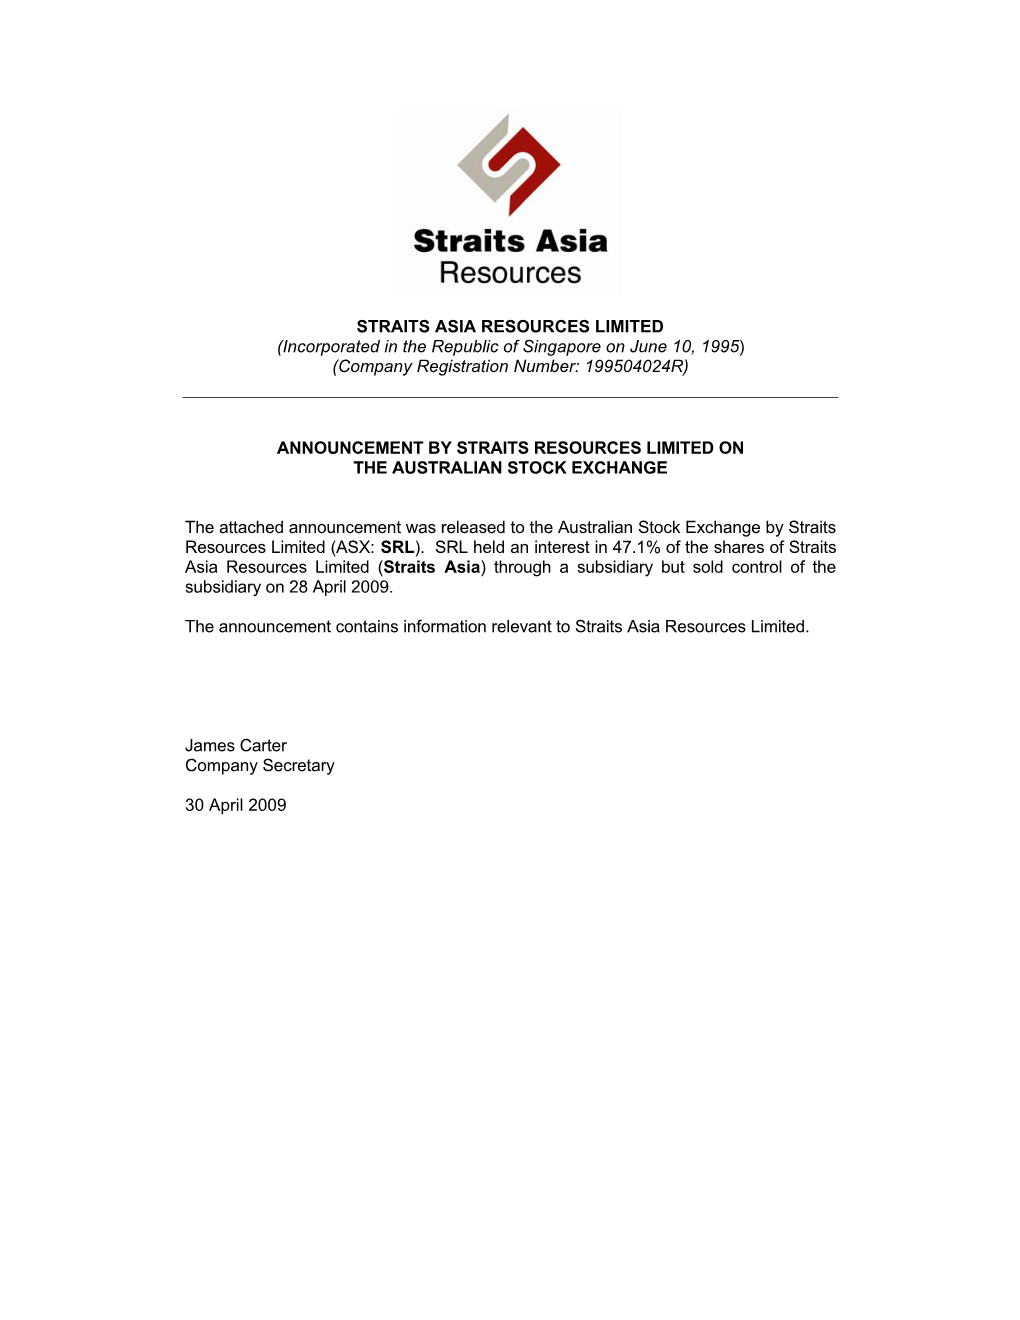 STRAITS ASIA RESOURCES LIMITED (Incorporated in the Republic of Singapore on June 10, 1995) (Company Registration Number: 199504024R)